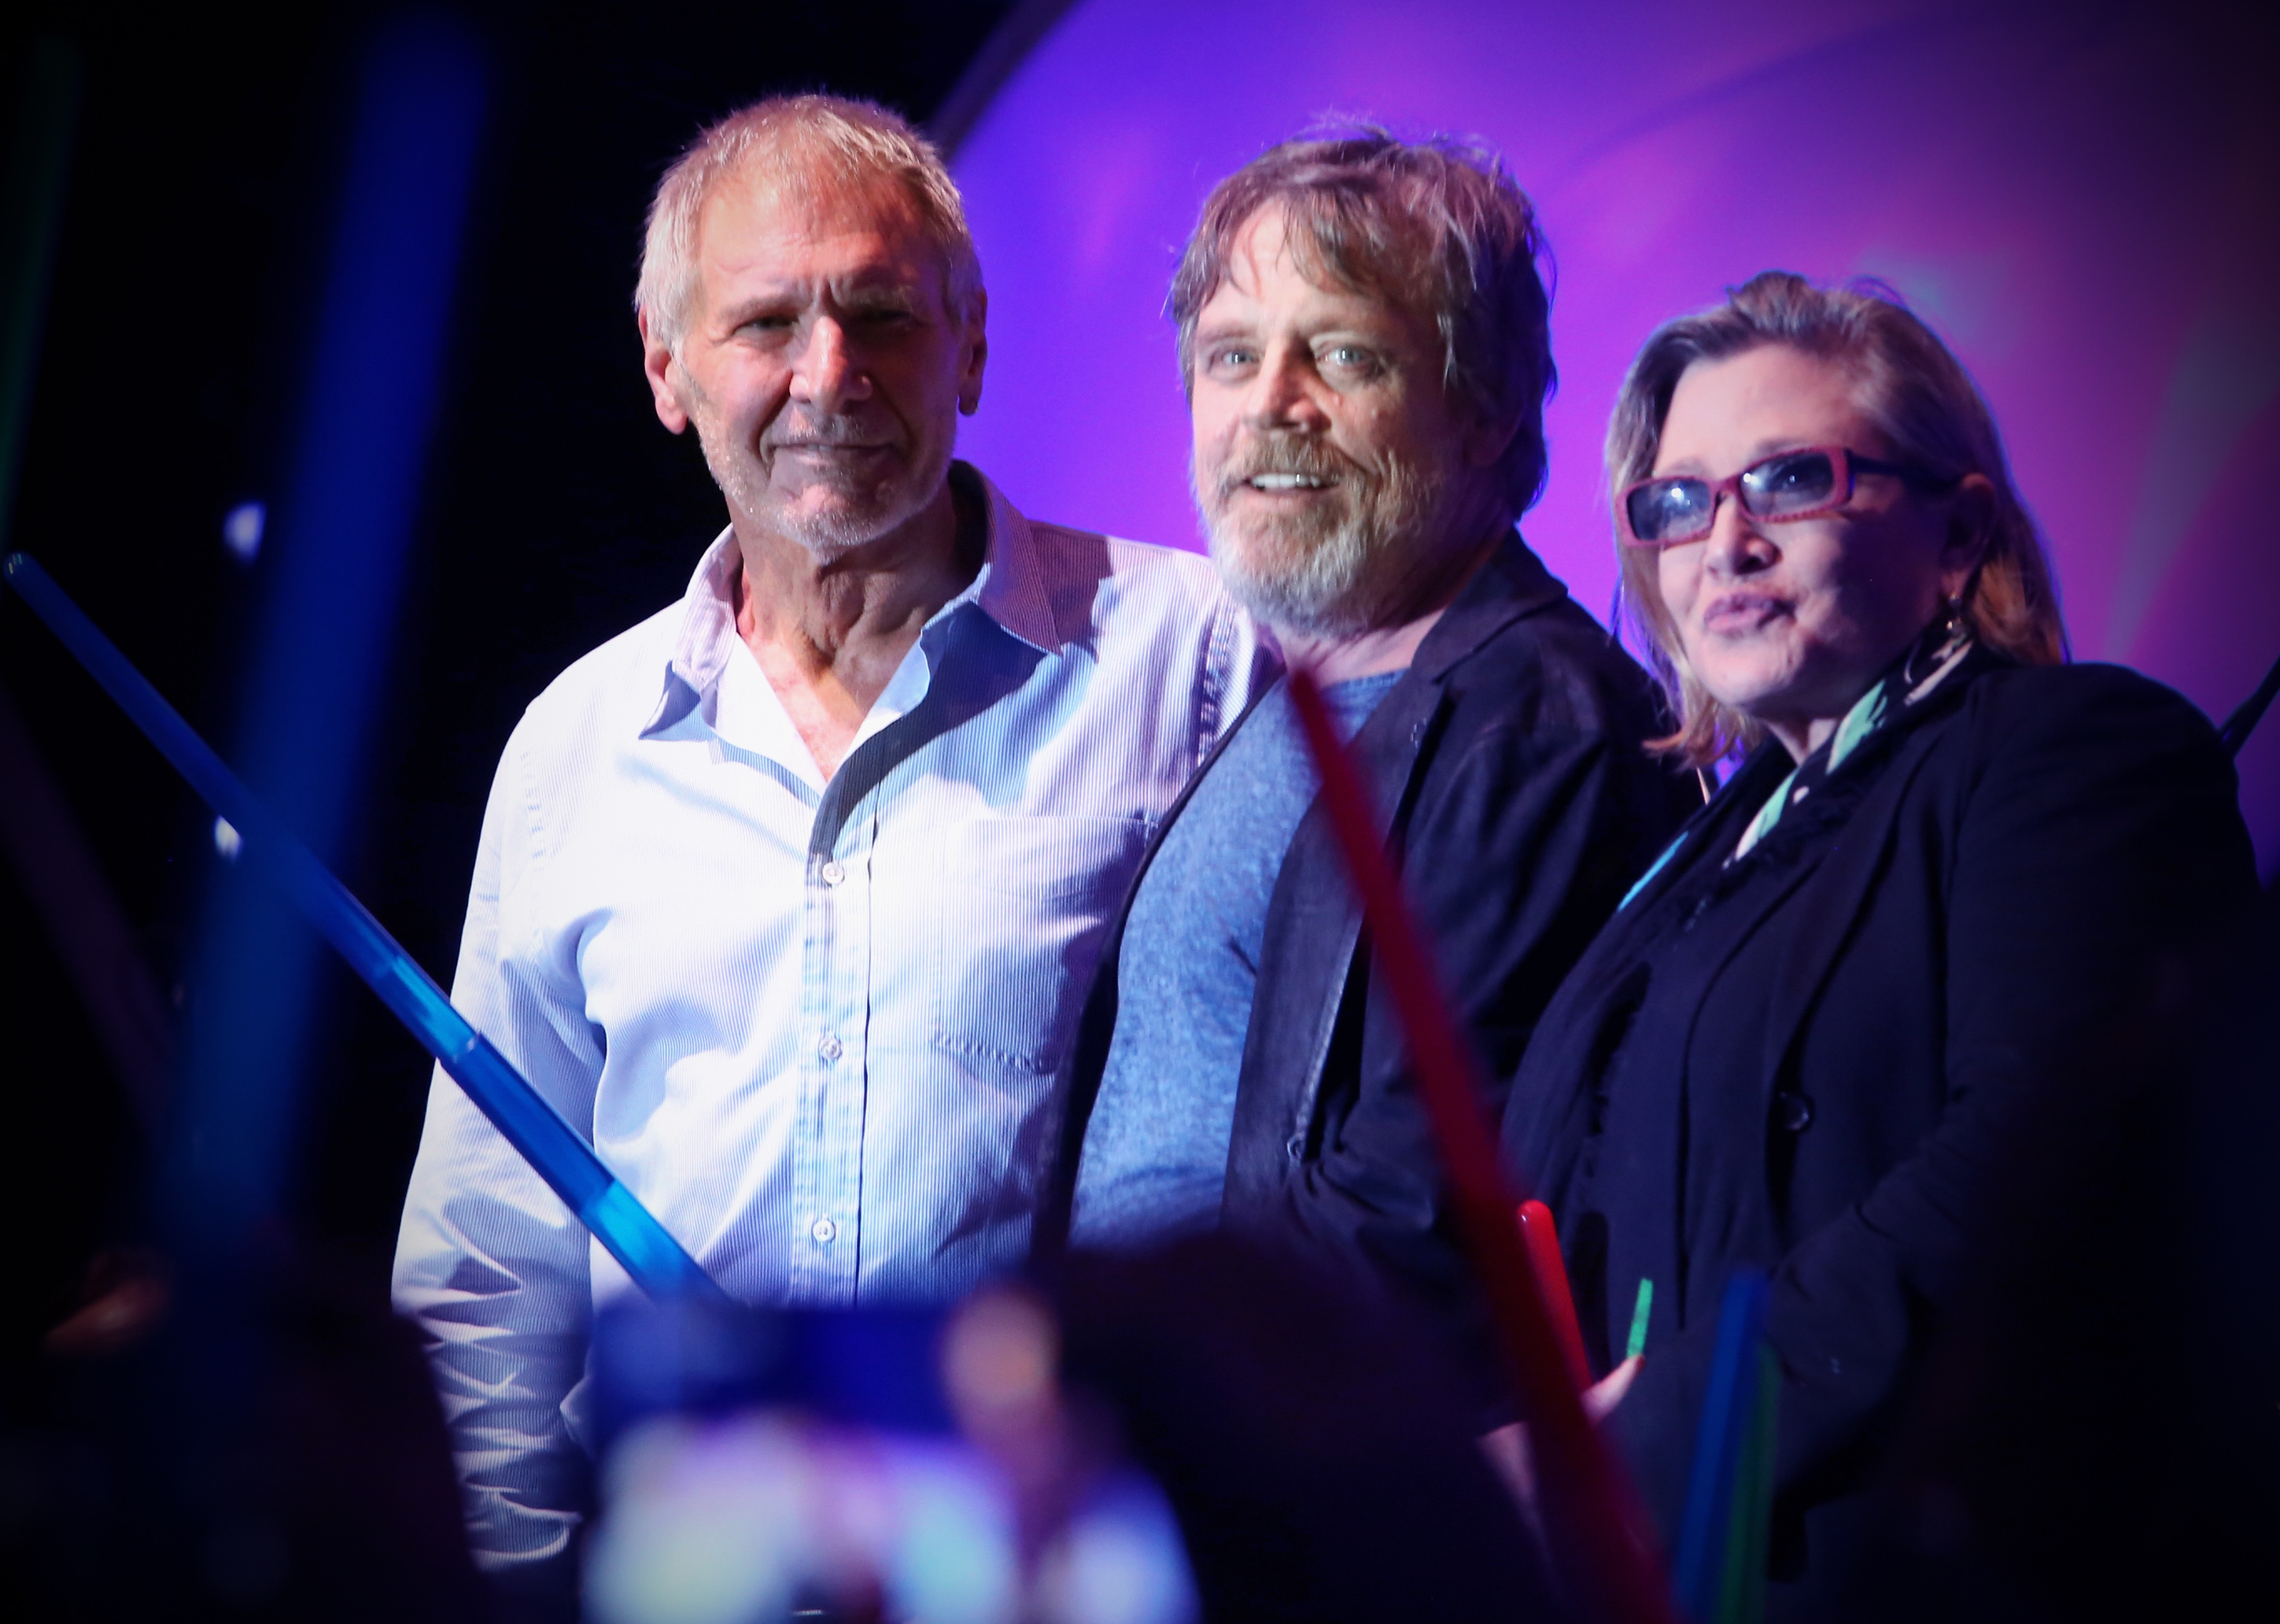 Actors Harrison Ford, Mark Hamill, Carrie Fisher and more than 6000 fans enjoyed a surprise "Star Wars" Fan Concert performed by the San Diego Symphony, featuring the classic "Star Wars" music of composer John Williams, at the Embarcadero Marina Park South on July 10, 2015 in San Diego, California.  (Photo by Jesse Grant/Getty Images for Disney)